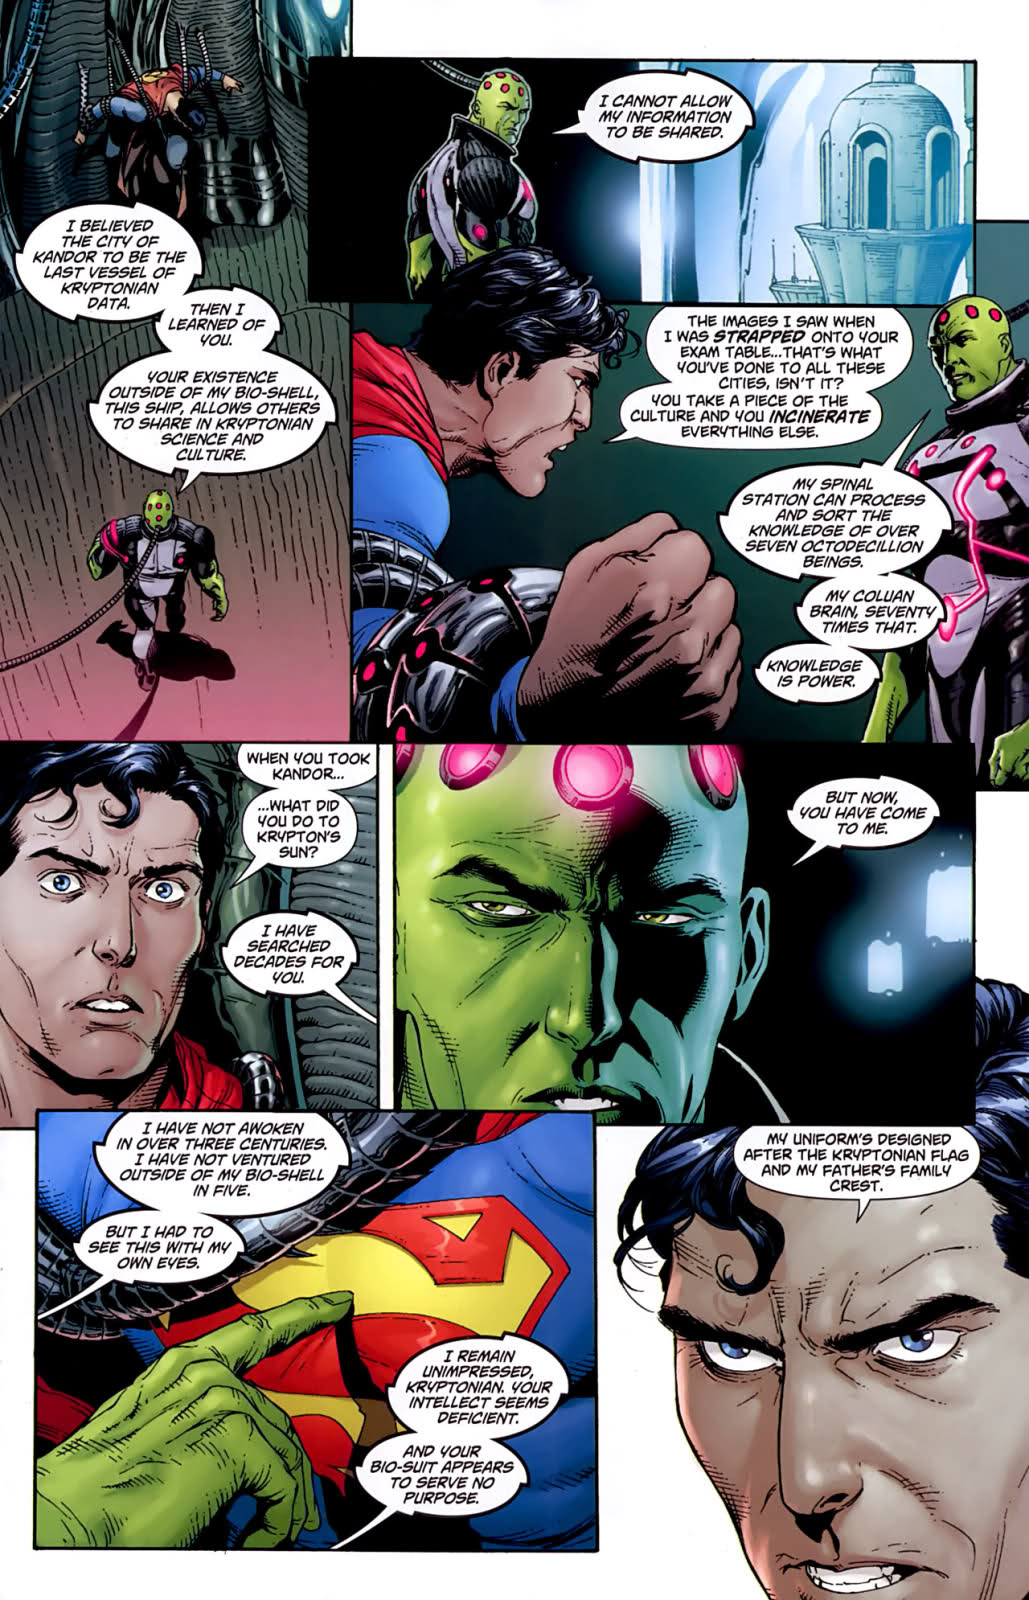 Brainaic's processing power. This was still not sufficiant to defeat Lex however. It should be noted Brainiac out-prepped 2 other Brainiac's (a 12th and a 10th level intellect)